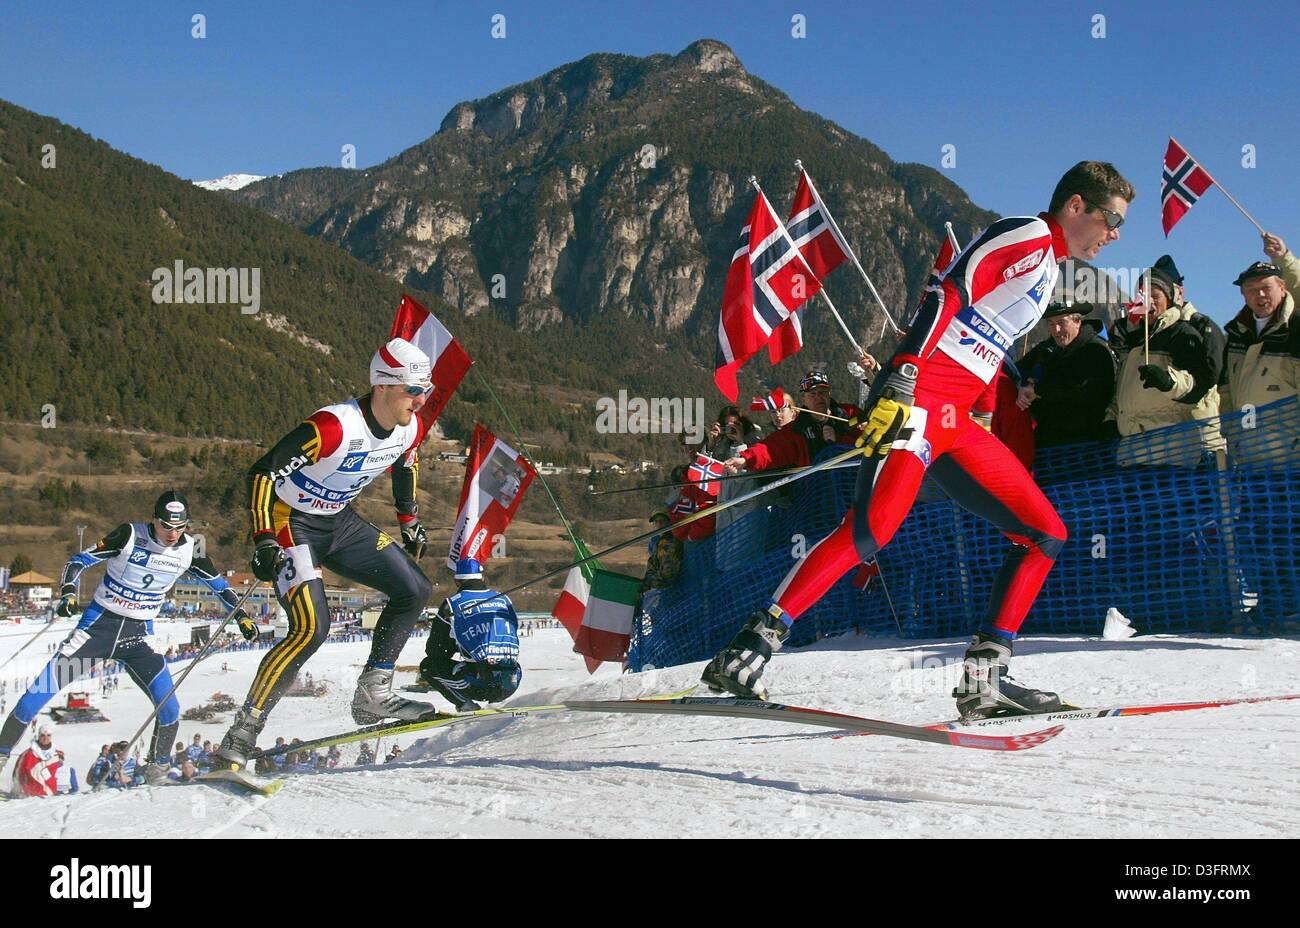 (dpa) - Norwegian runner Thomas Alsgaard (R) leads Germany's Axel Teichmann (C) and Estonia's Indrek Tobreluts (L) during the 4x10 km relay event of the nordic skiing world championships in Tesero in the Val di Fiemme, Italy, 25 February 2003. Norway's relay skiers win the event in 1:31:56,4 hours ahead of Germany and Sweden. Stock Photo